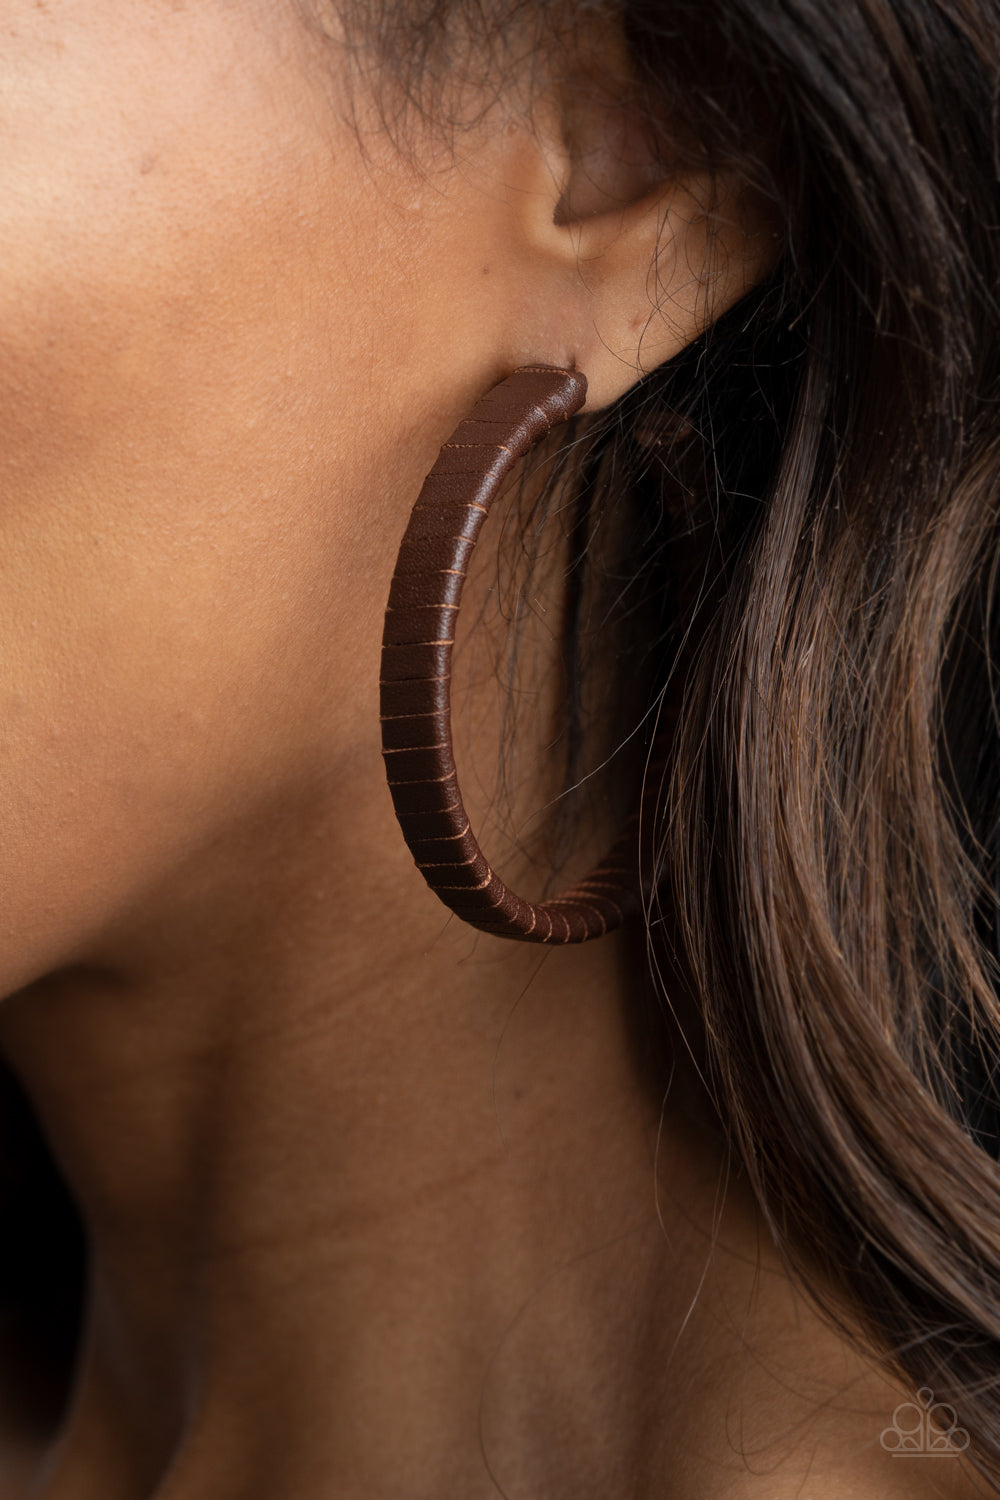 ​Leather-Clad Legend - Brown Leather Hoop Earrings - Paparazzi Accessories - 
A rustic brown leather lace wraps around a thick silver hoop, creating an edgy display. Earring attaches to a standard post fitting. Hoop measures approximately 2 1/2" in diameter.
Sold as one pair of hoop earrings.
